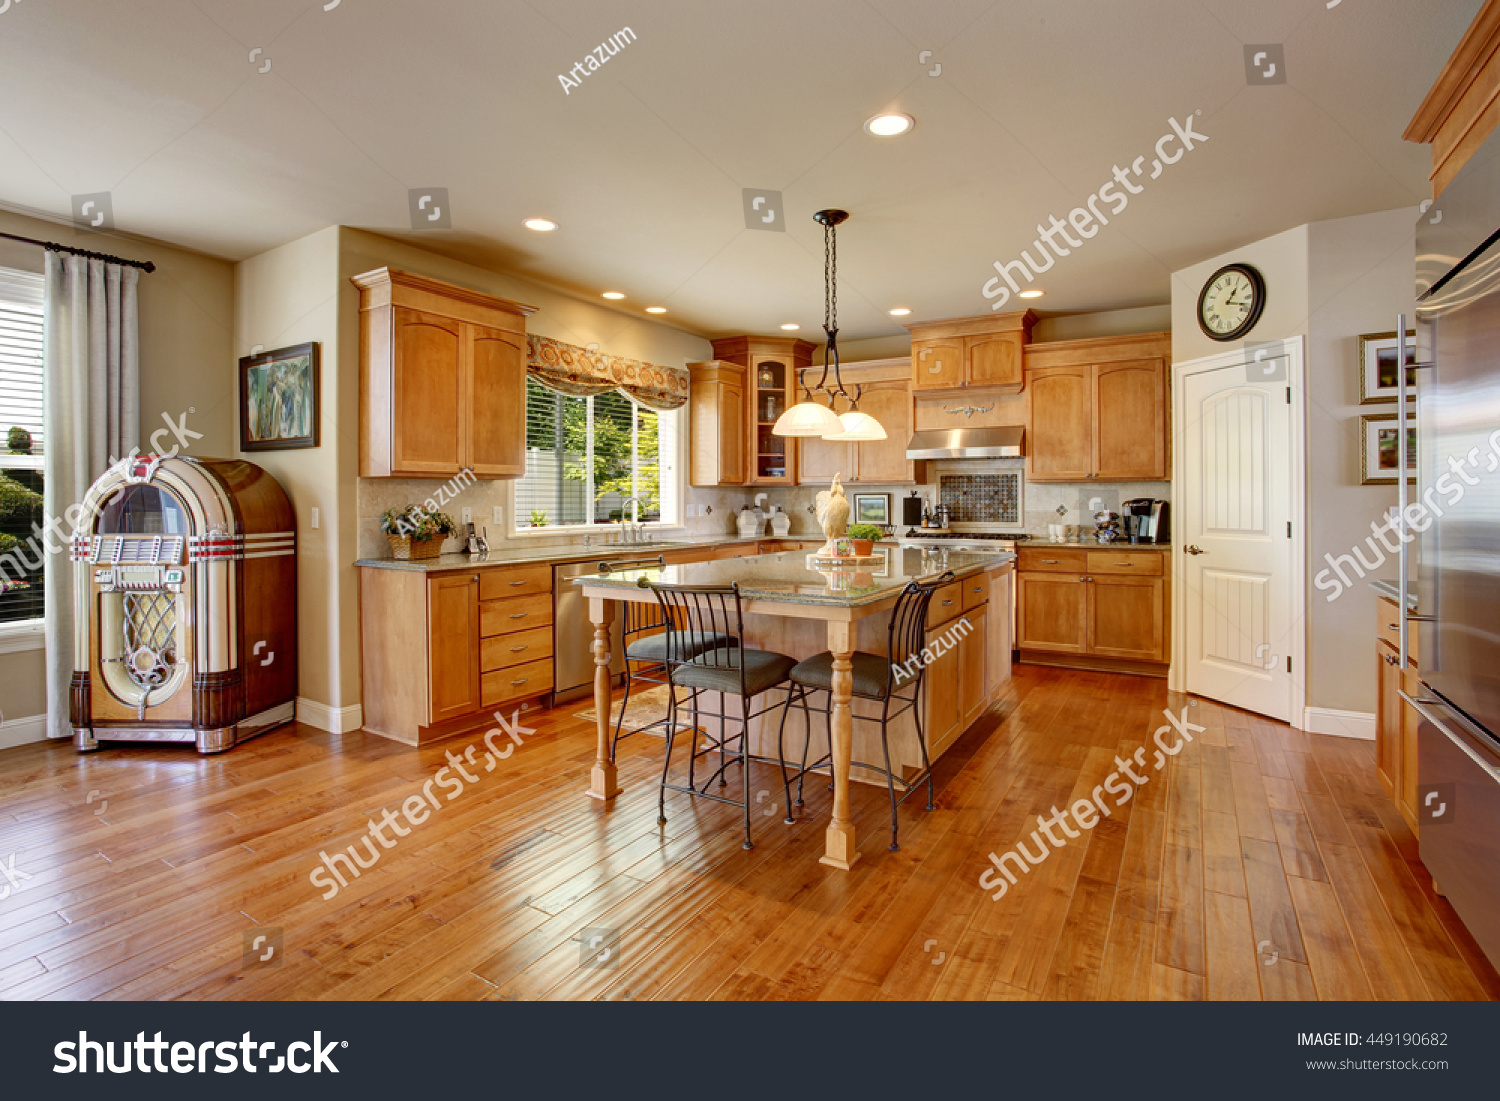 Classic American Kitchen Inerior Brown Cabinets Stock Image